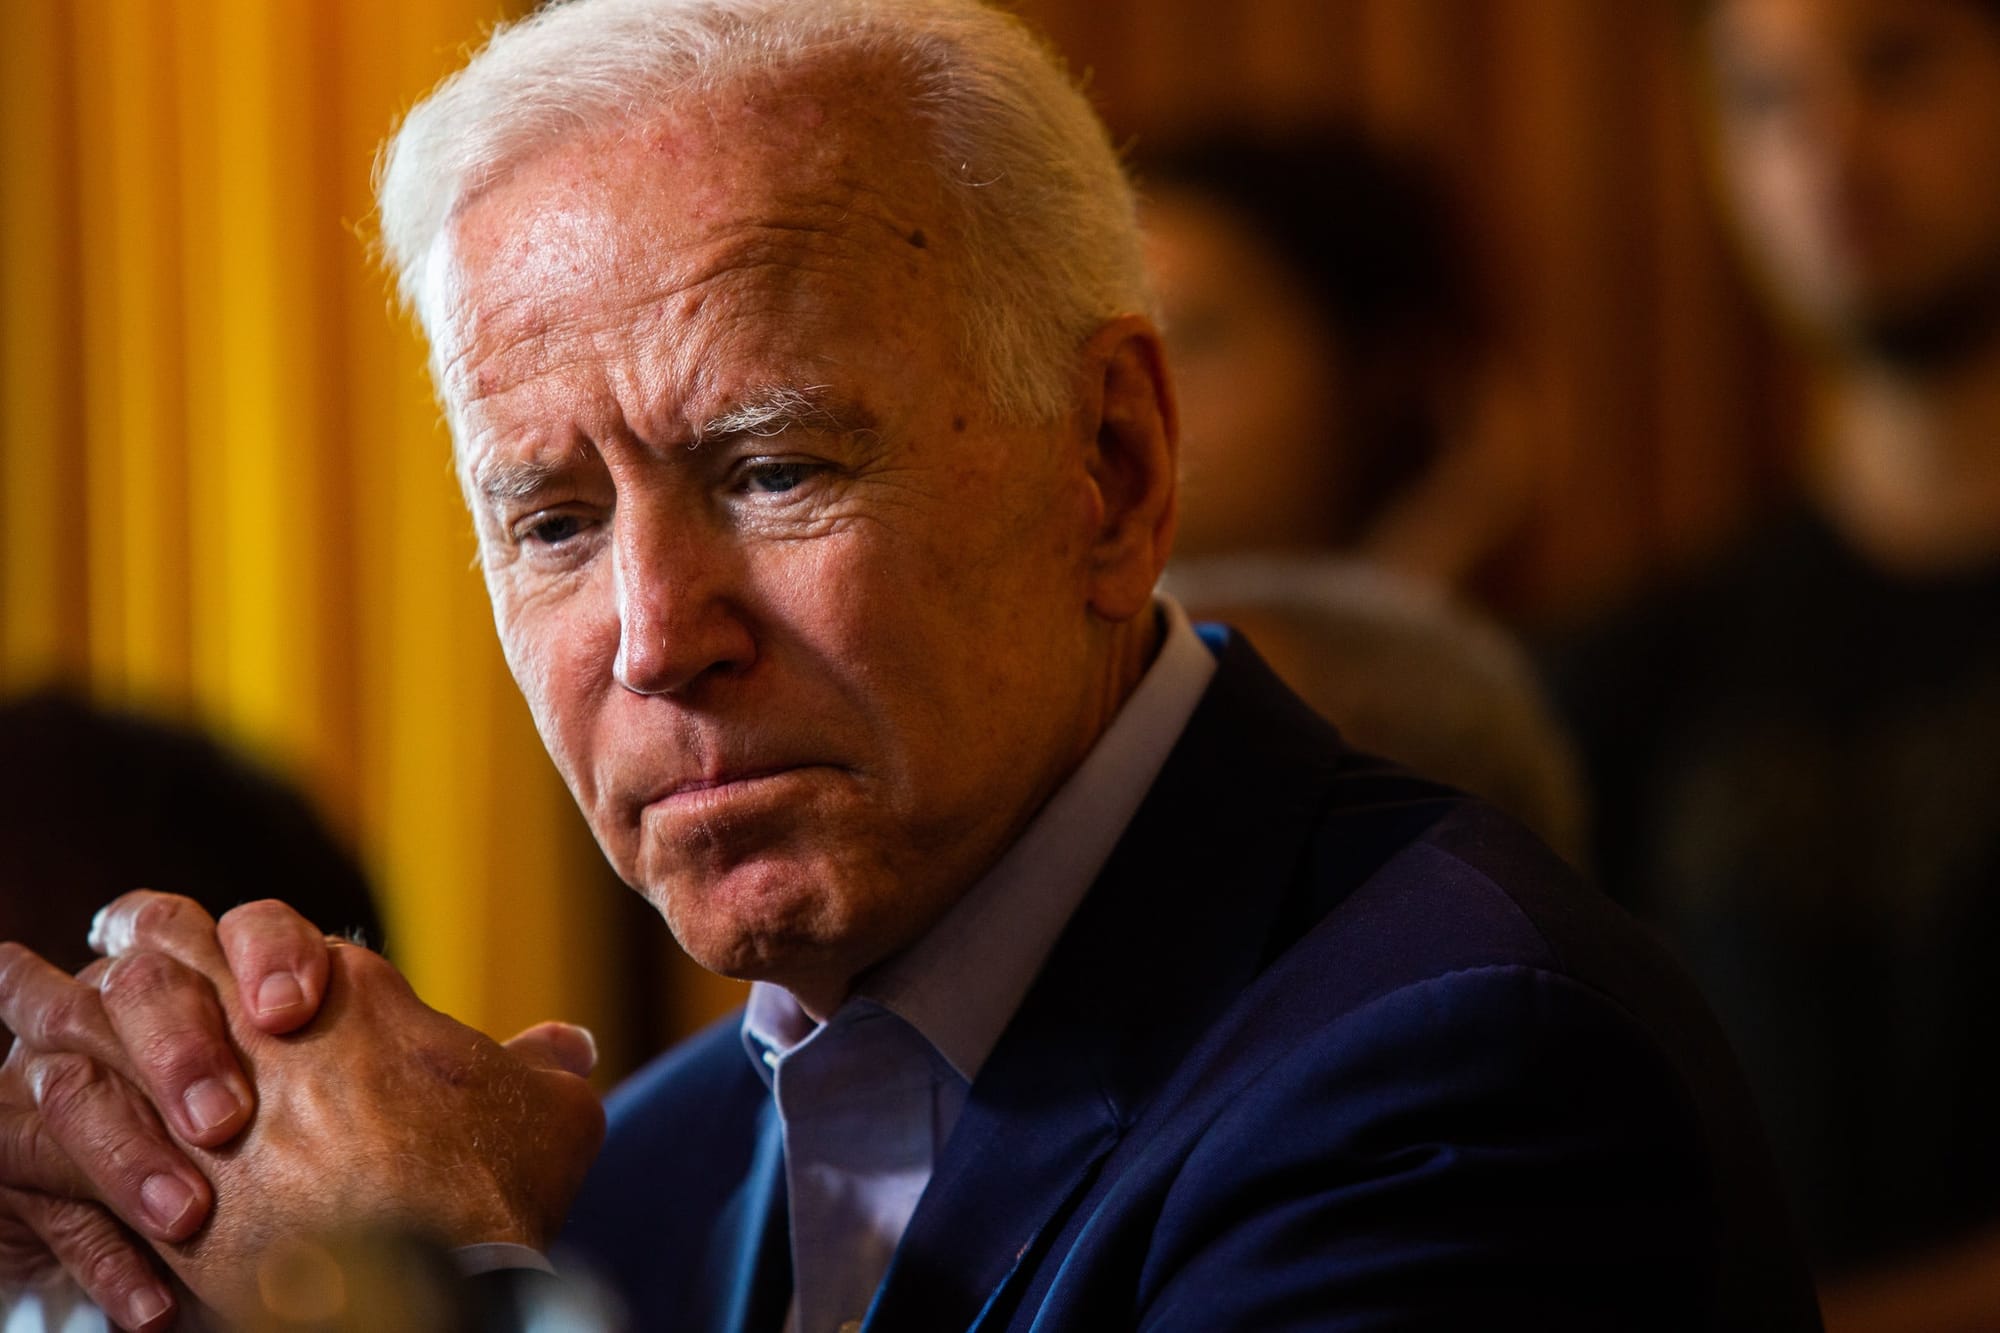 Health Concerns Predicted to Sideline President Biden from 2024 Race, According to JPMorgan Strategist